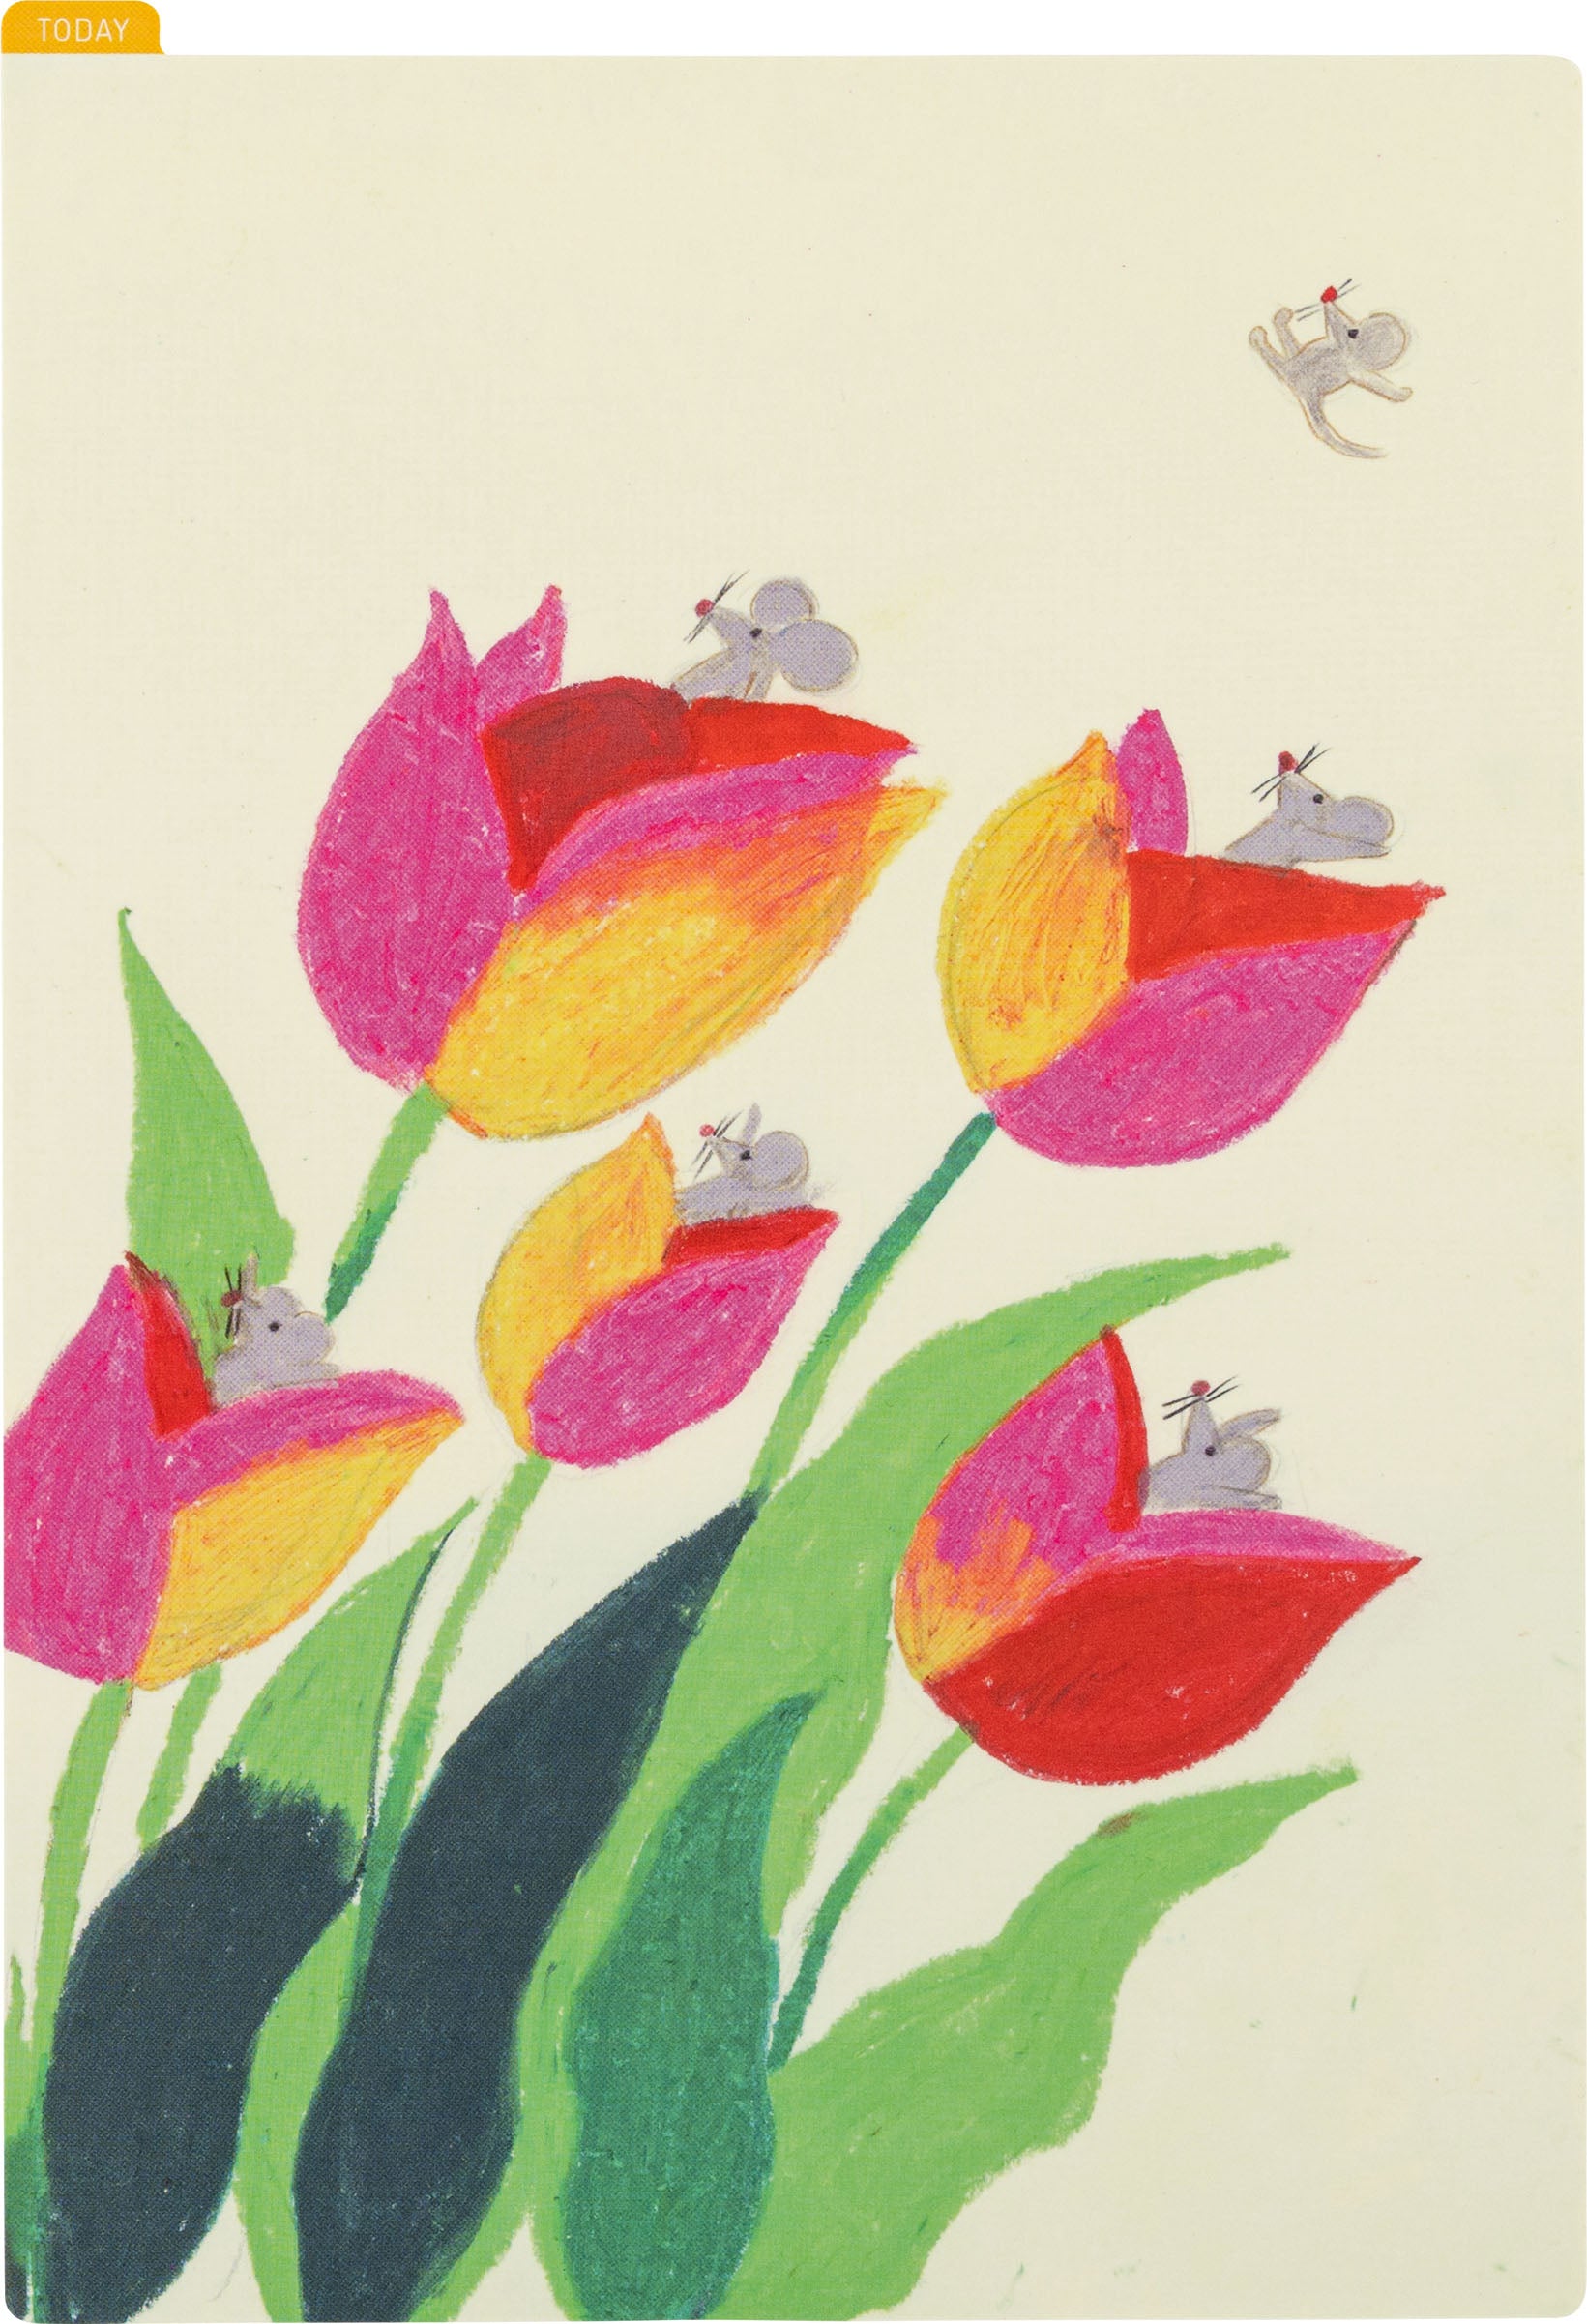 Hobonichi Pencil Board for A5 Size Keiko Shibata - Swaying tulips This pencil board features an illustration created by Keiko Shibata. In this pencil board you can find mice in a tulip field playing in the wind.